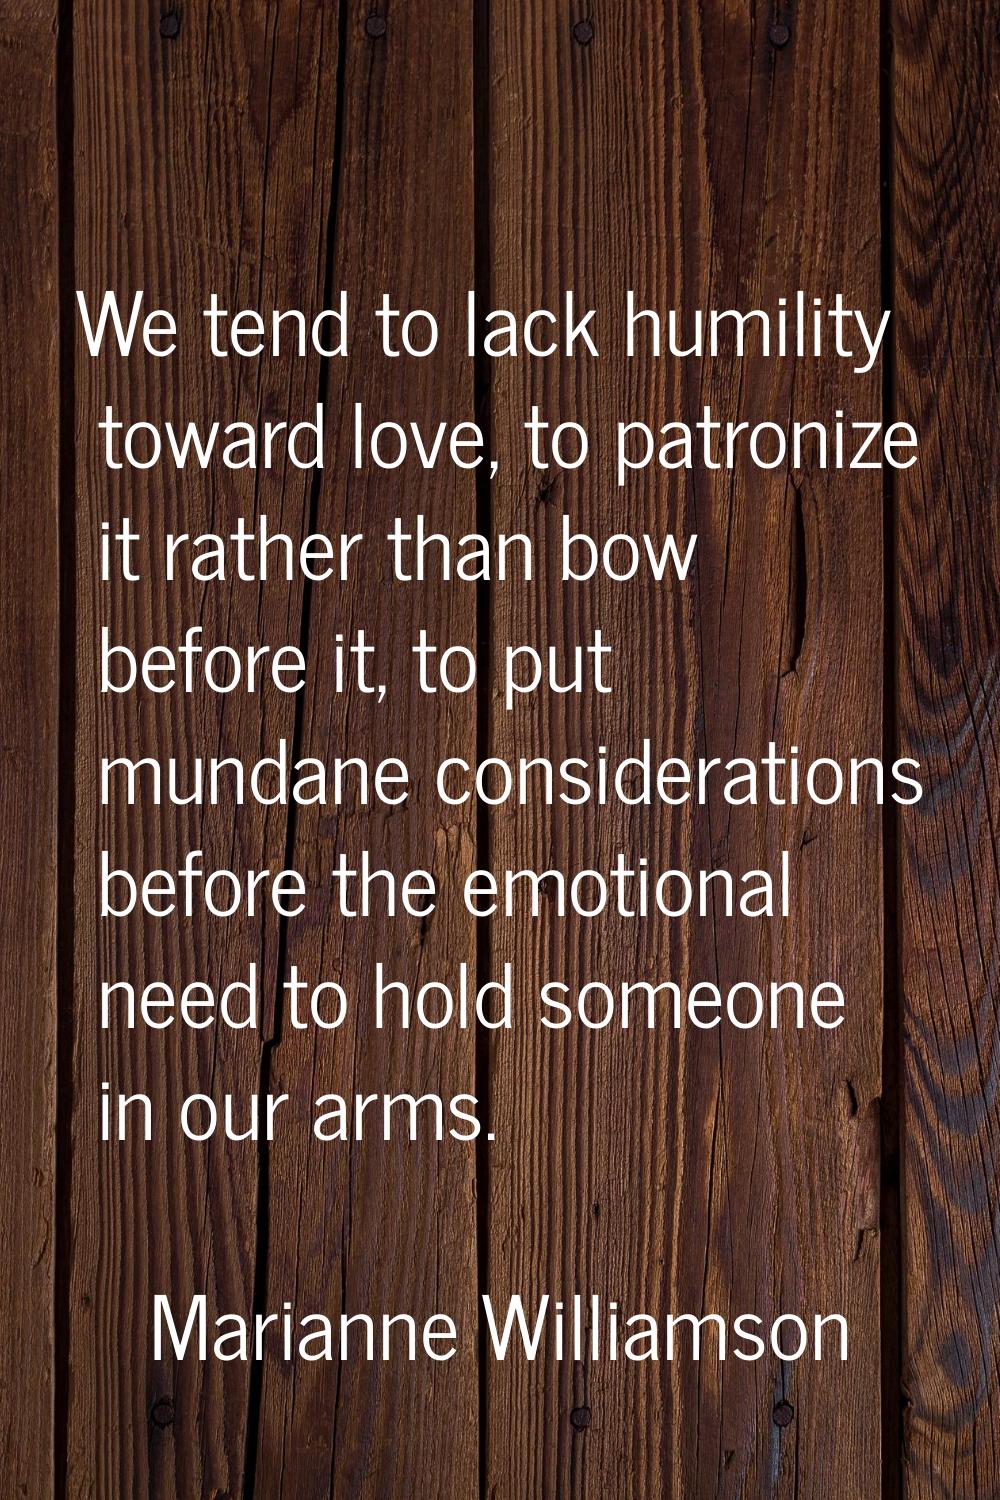 We tend to lack humility toward love, to patronize it rather than bow before it, to put mundane con